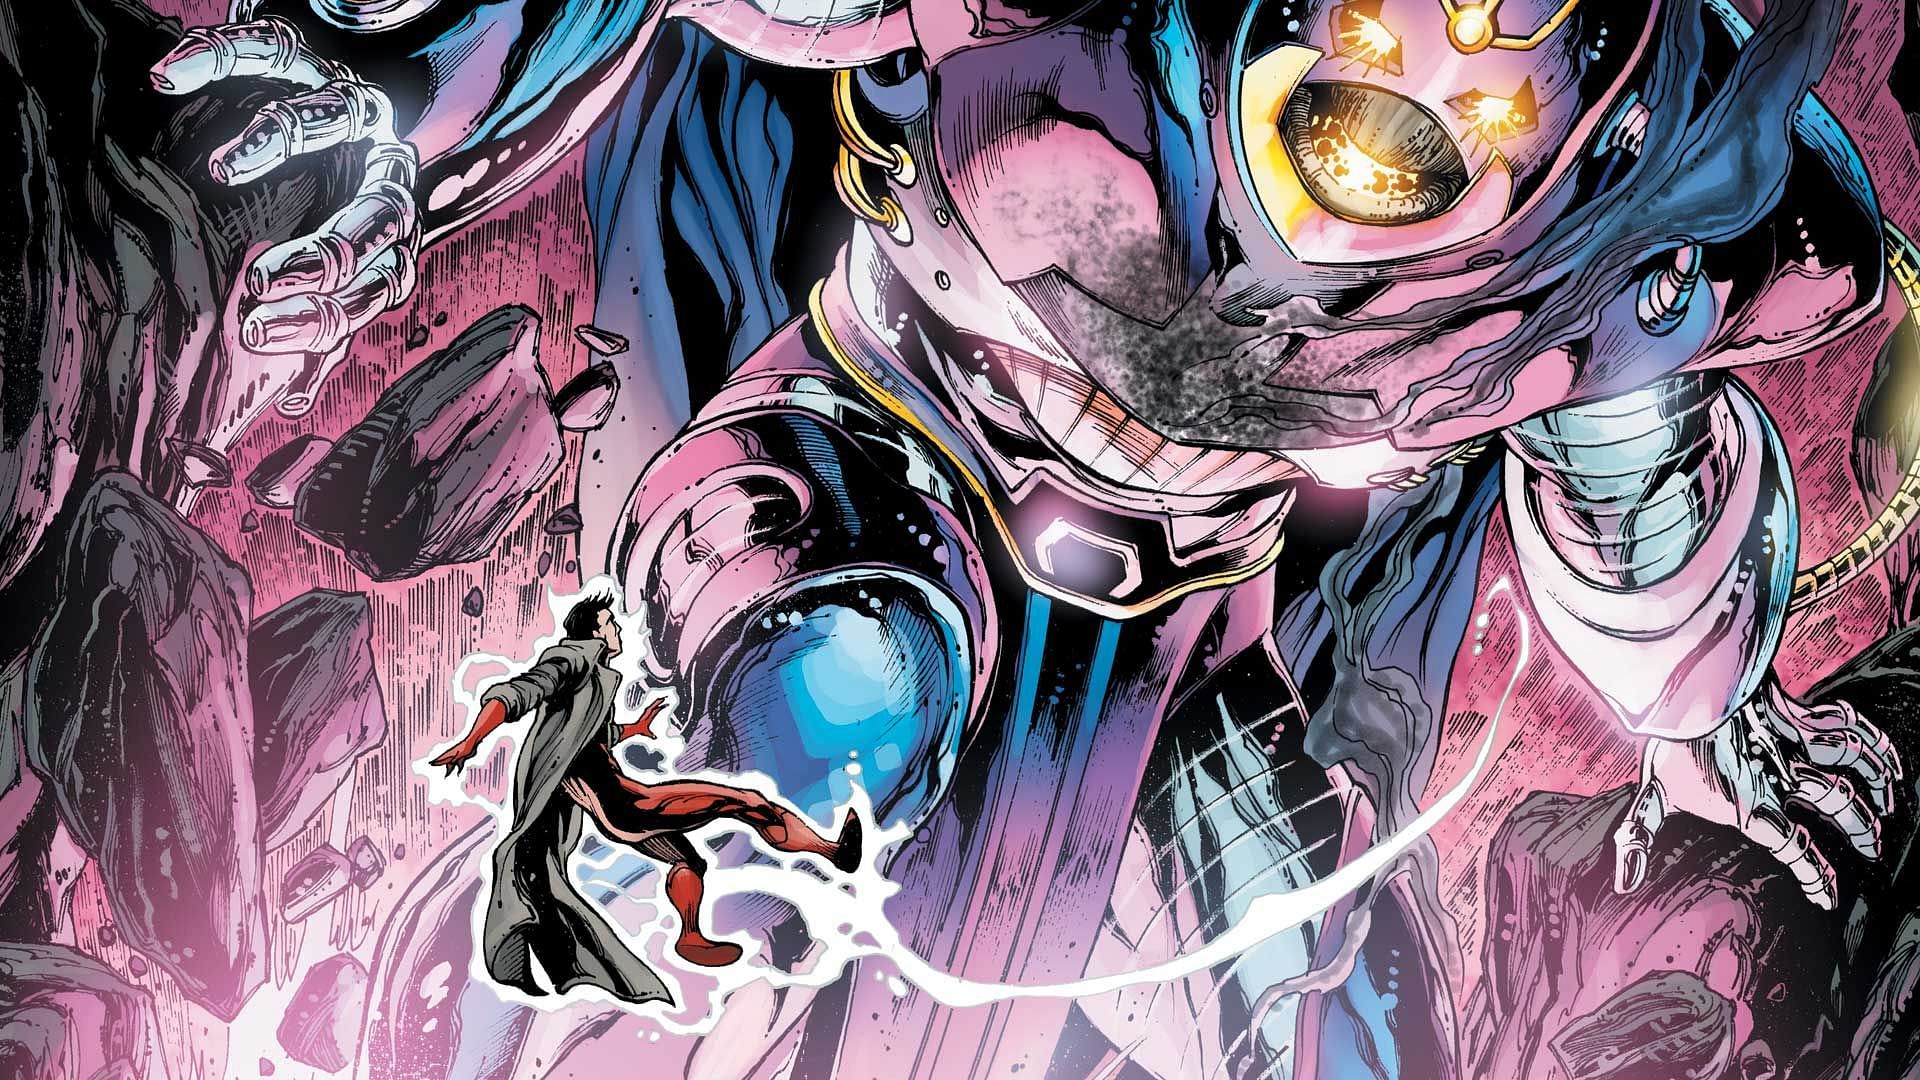 The Anti-Monitor has been involved in some of the most epic and memorable storylines in DC villain history. (Image via DC)